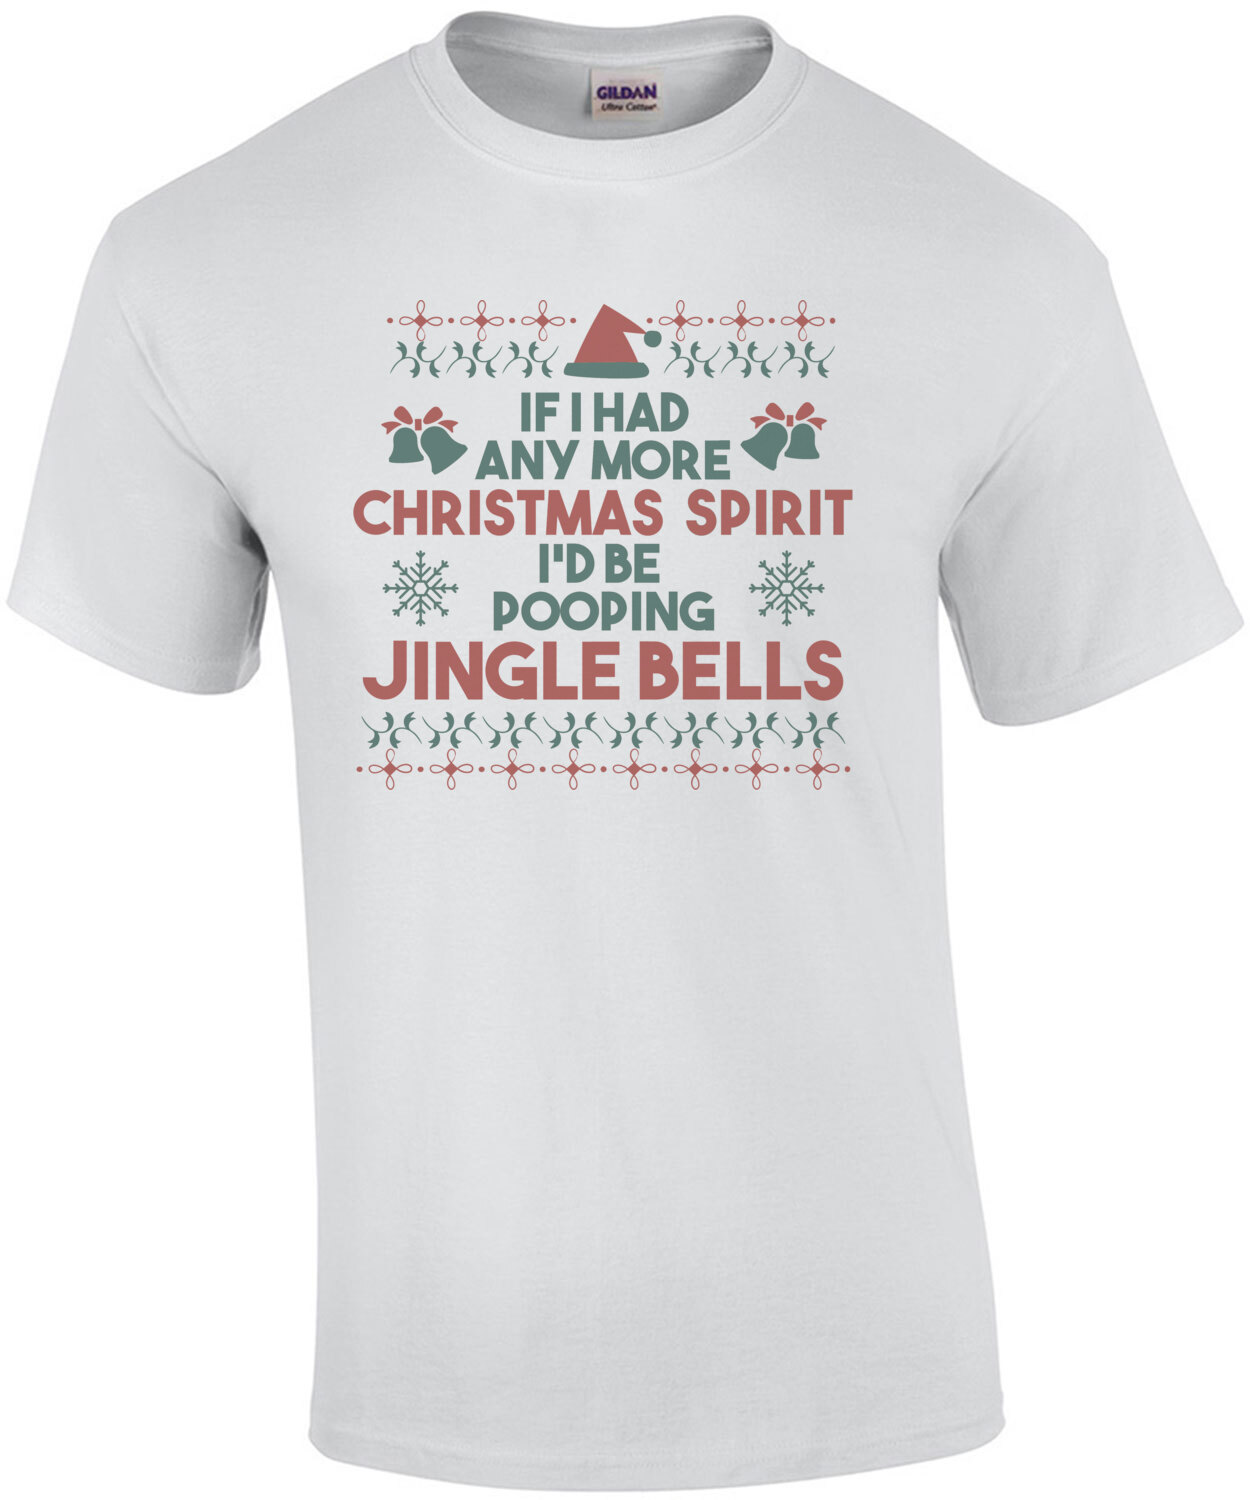 If I had any more Christmas Spirit I'd be pooping jingle bells - funny ...